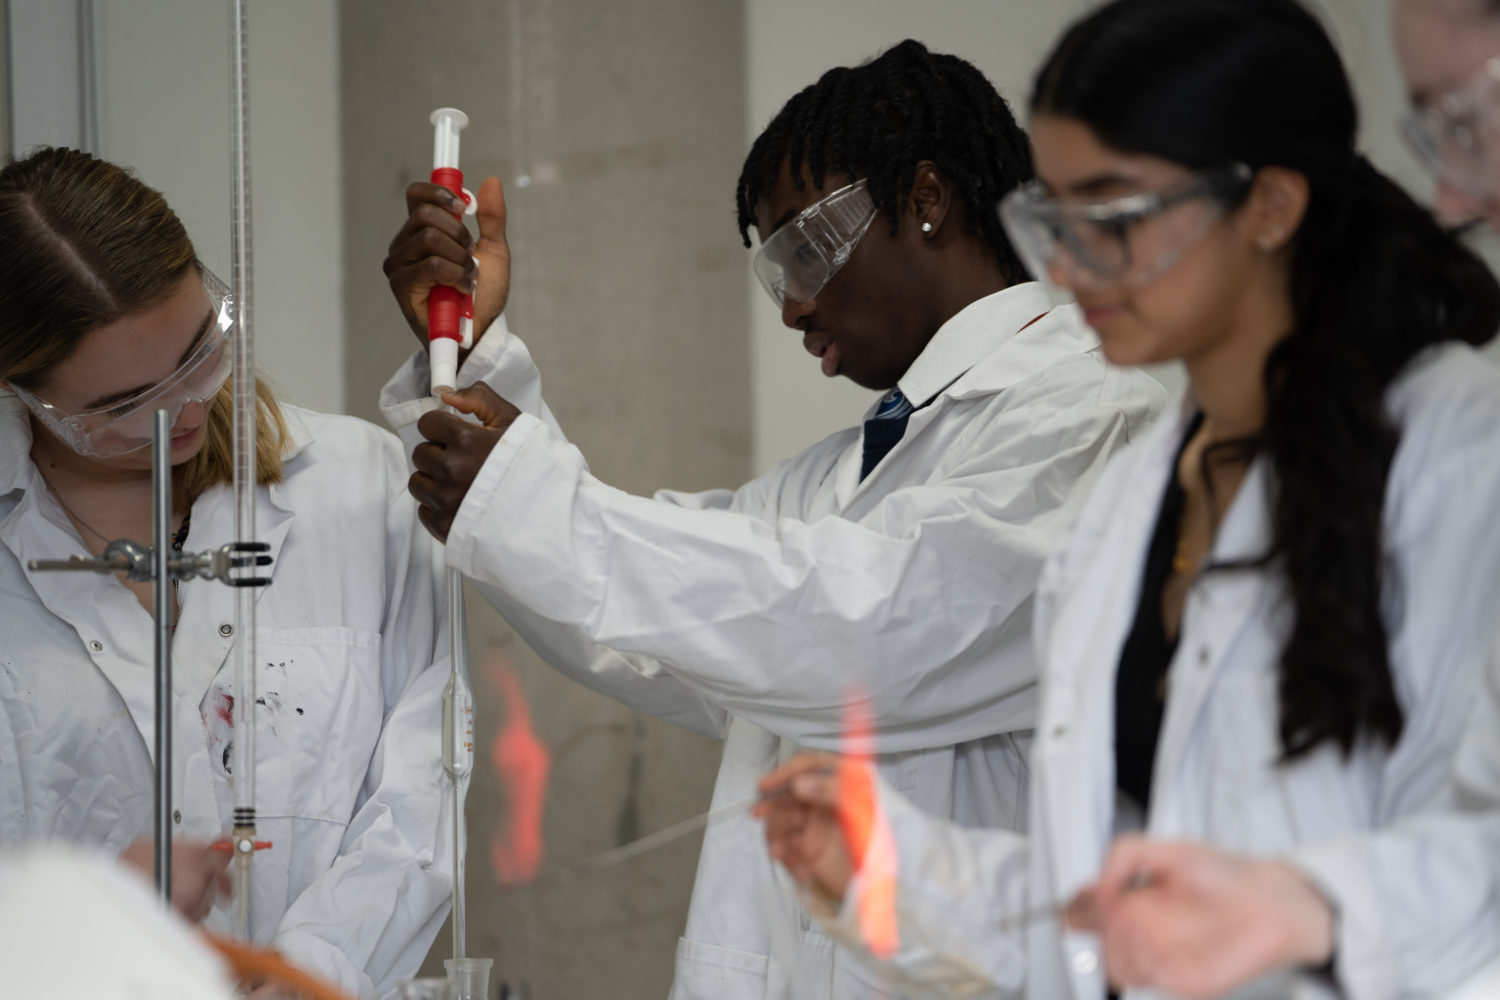 Three students working on an experiment during a chemistry lesson